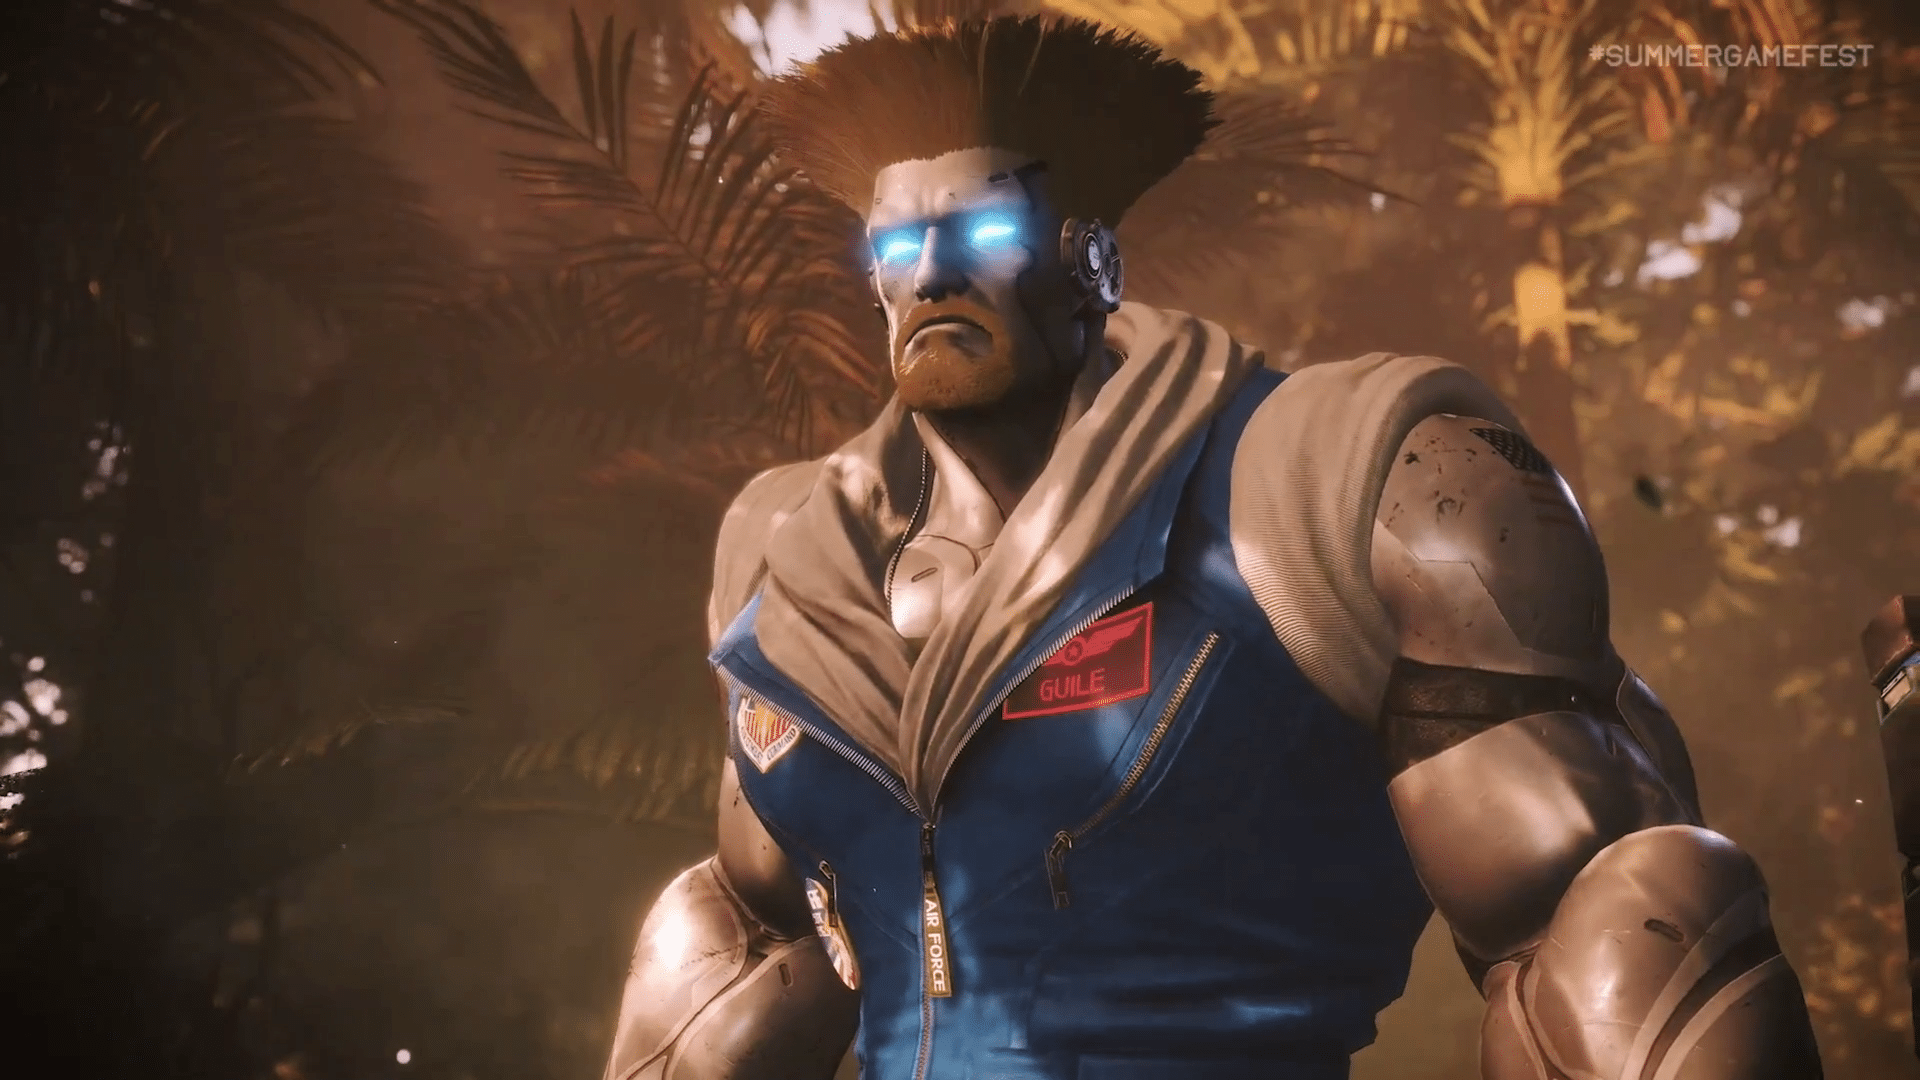 Street Fighter 6 x Exoprimal Collab Unveiled, Goes Live Fall 2023